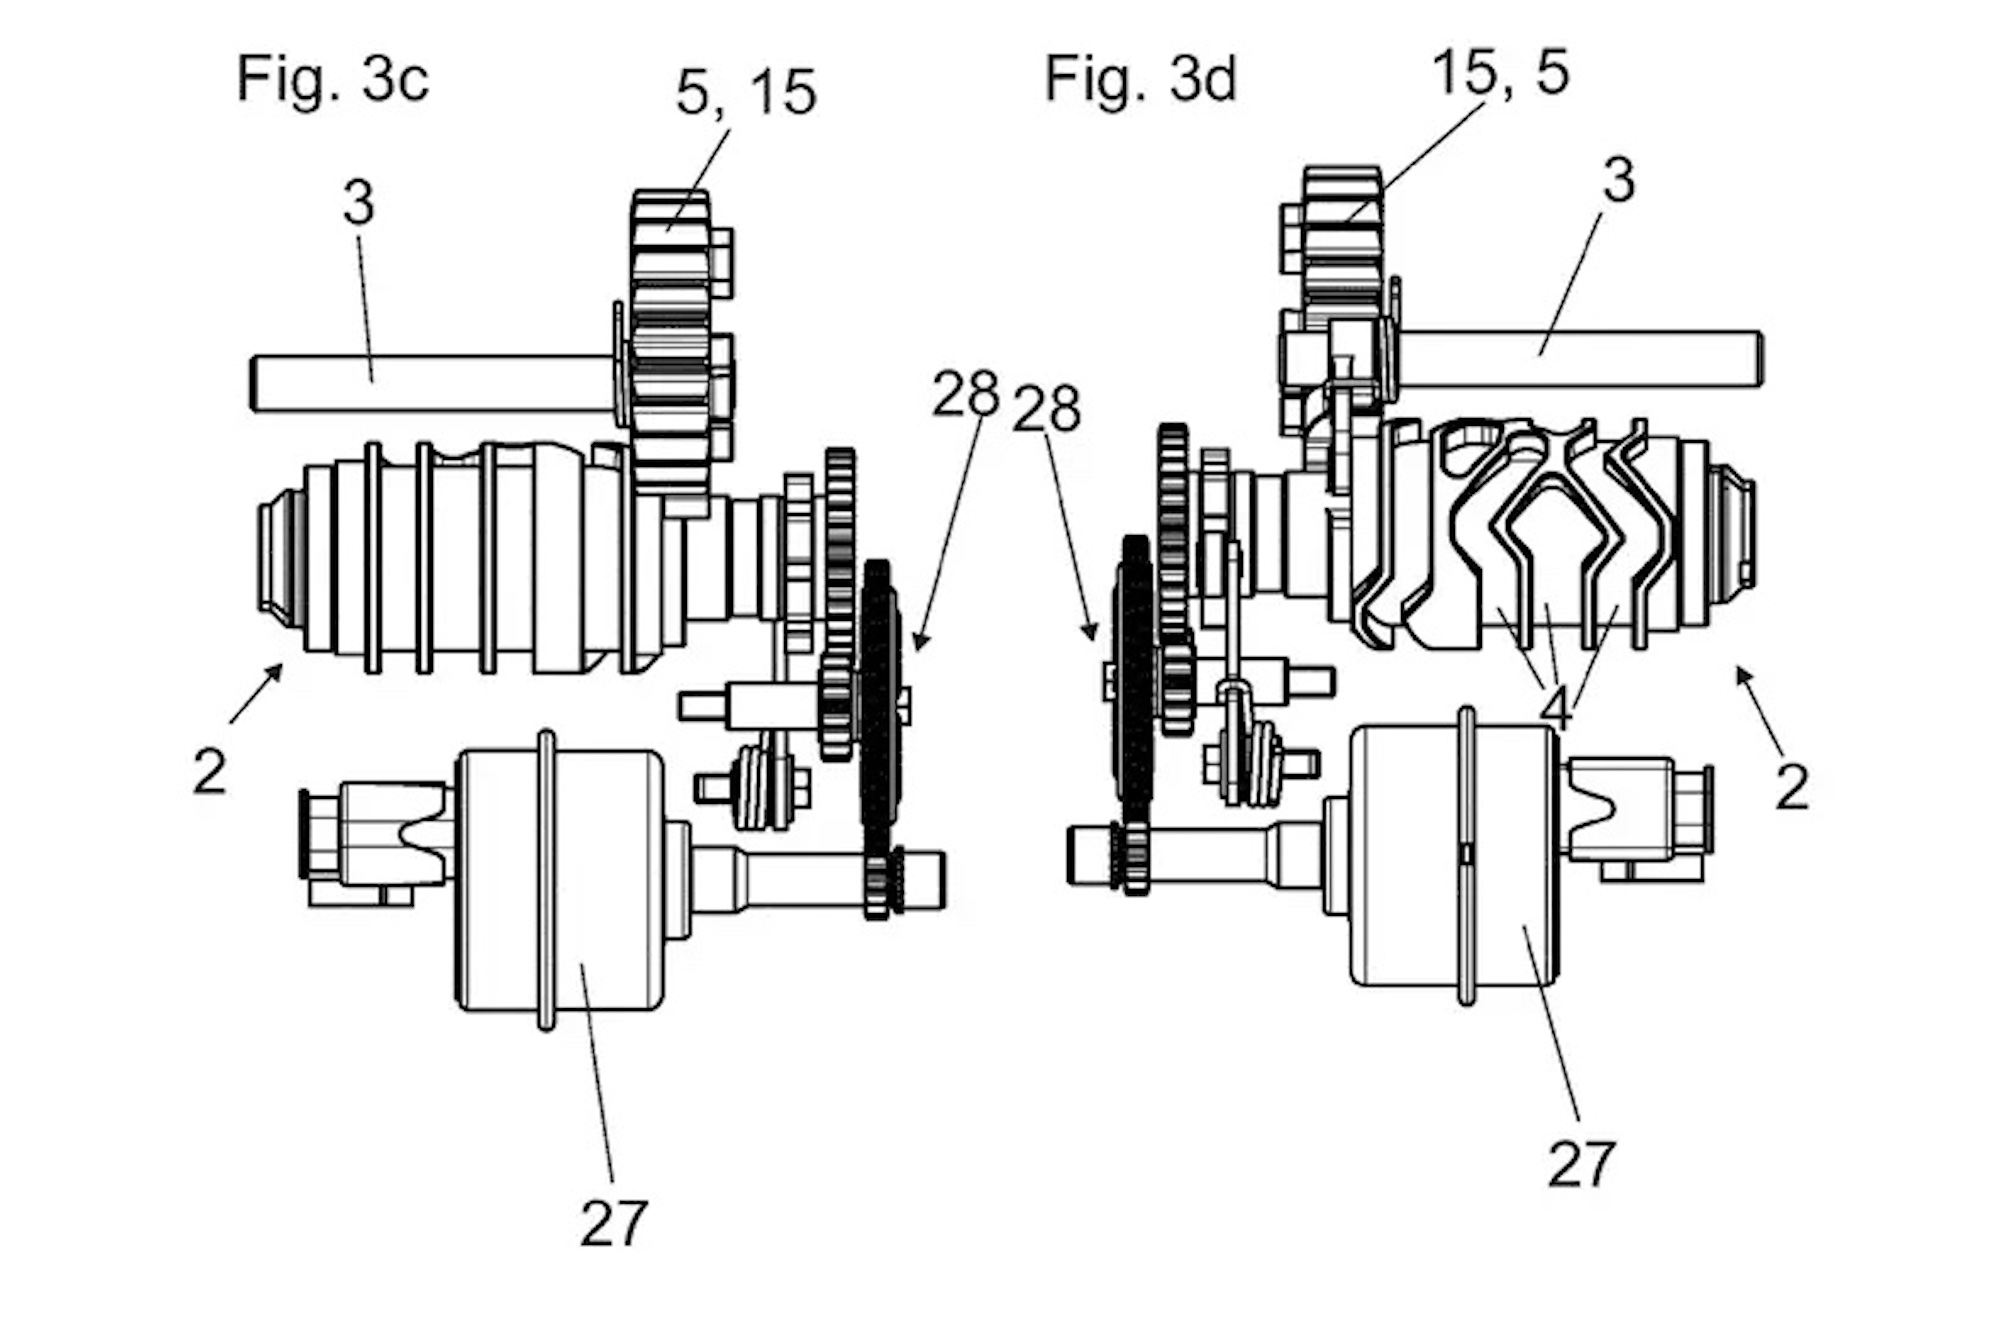 A view of the image connected to KTM's patent file for a semi-automatic system. Media sourced from MCN.